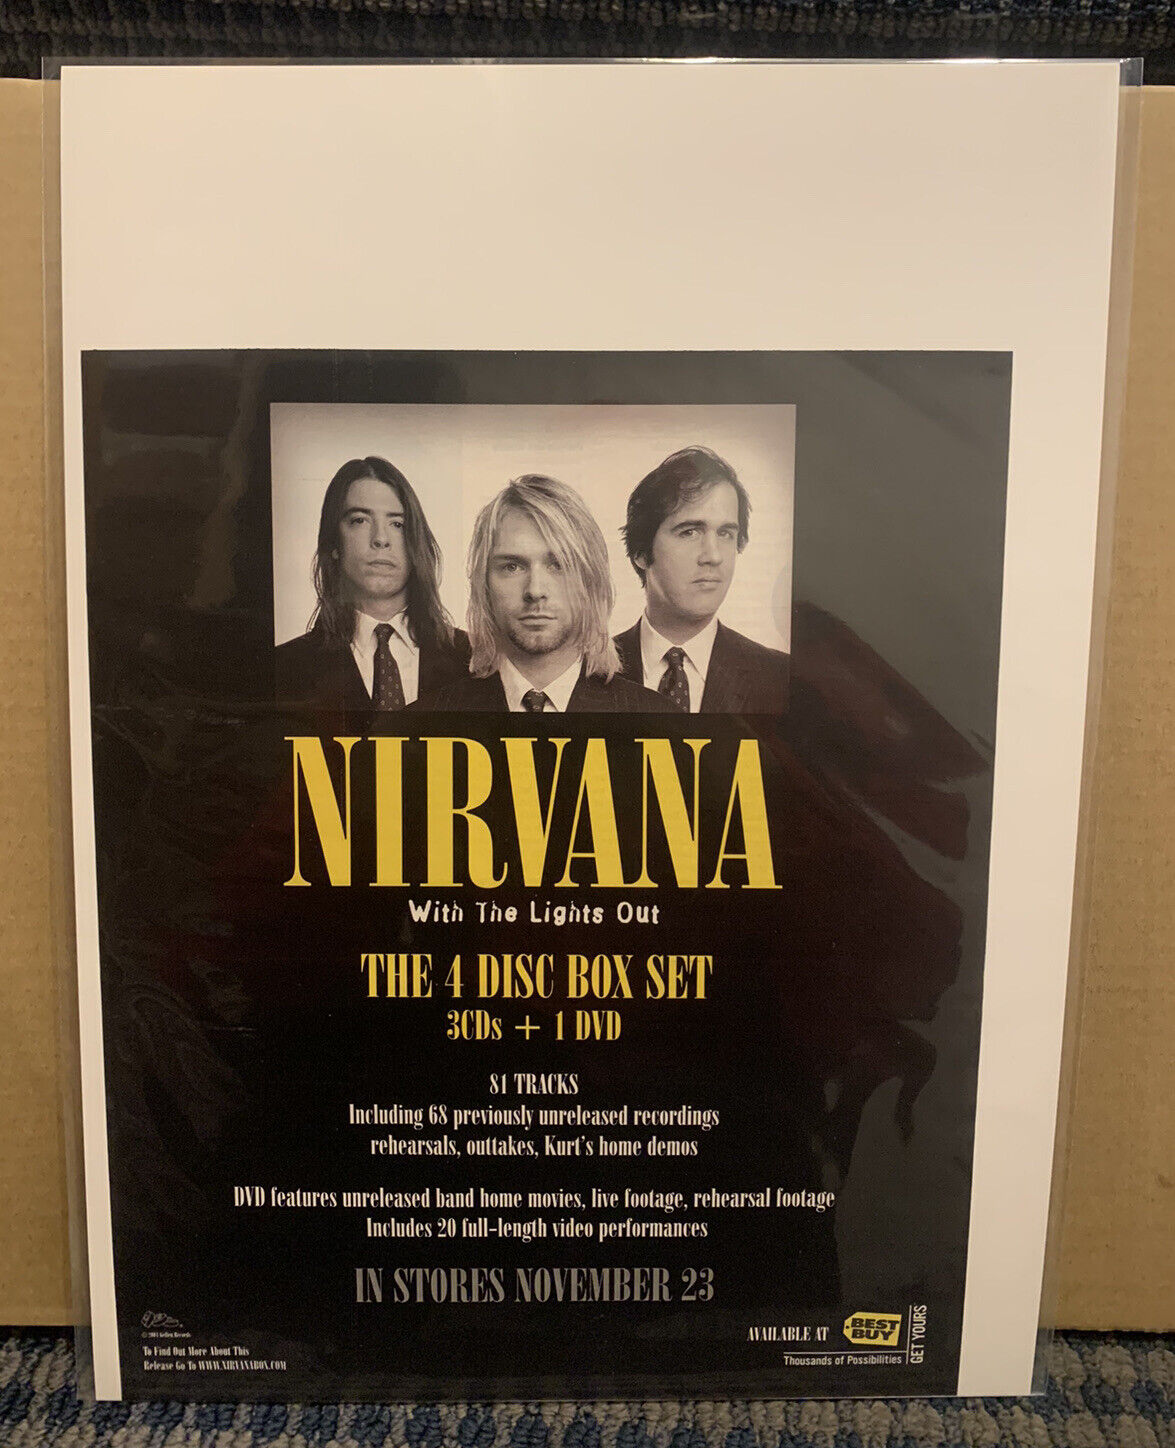 2004 NIRVANA Album Release Print Ad “With The Lights Out” Approx 10 x 12 (MH216)